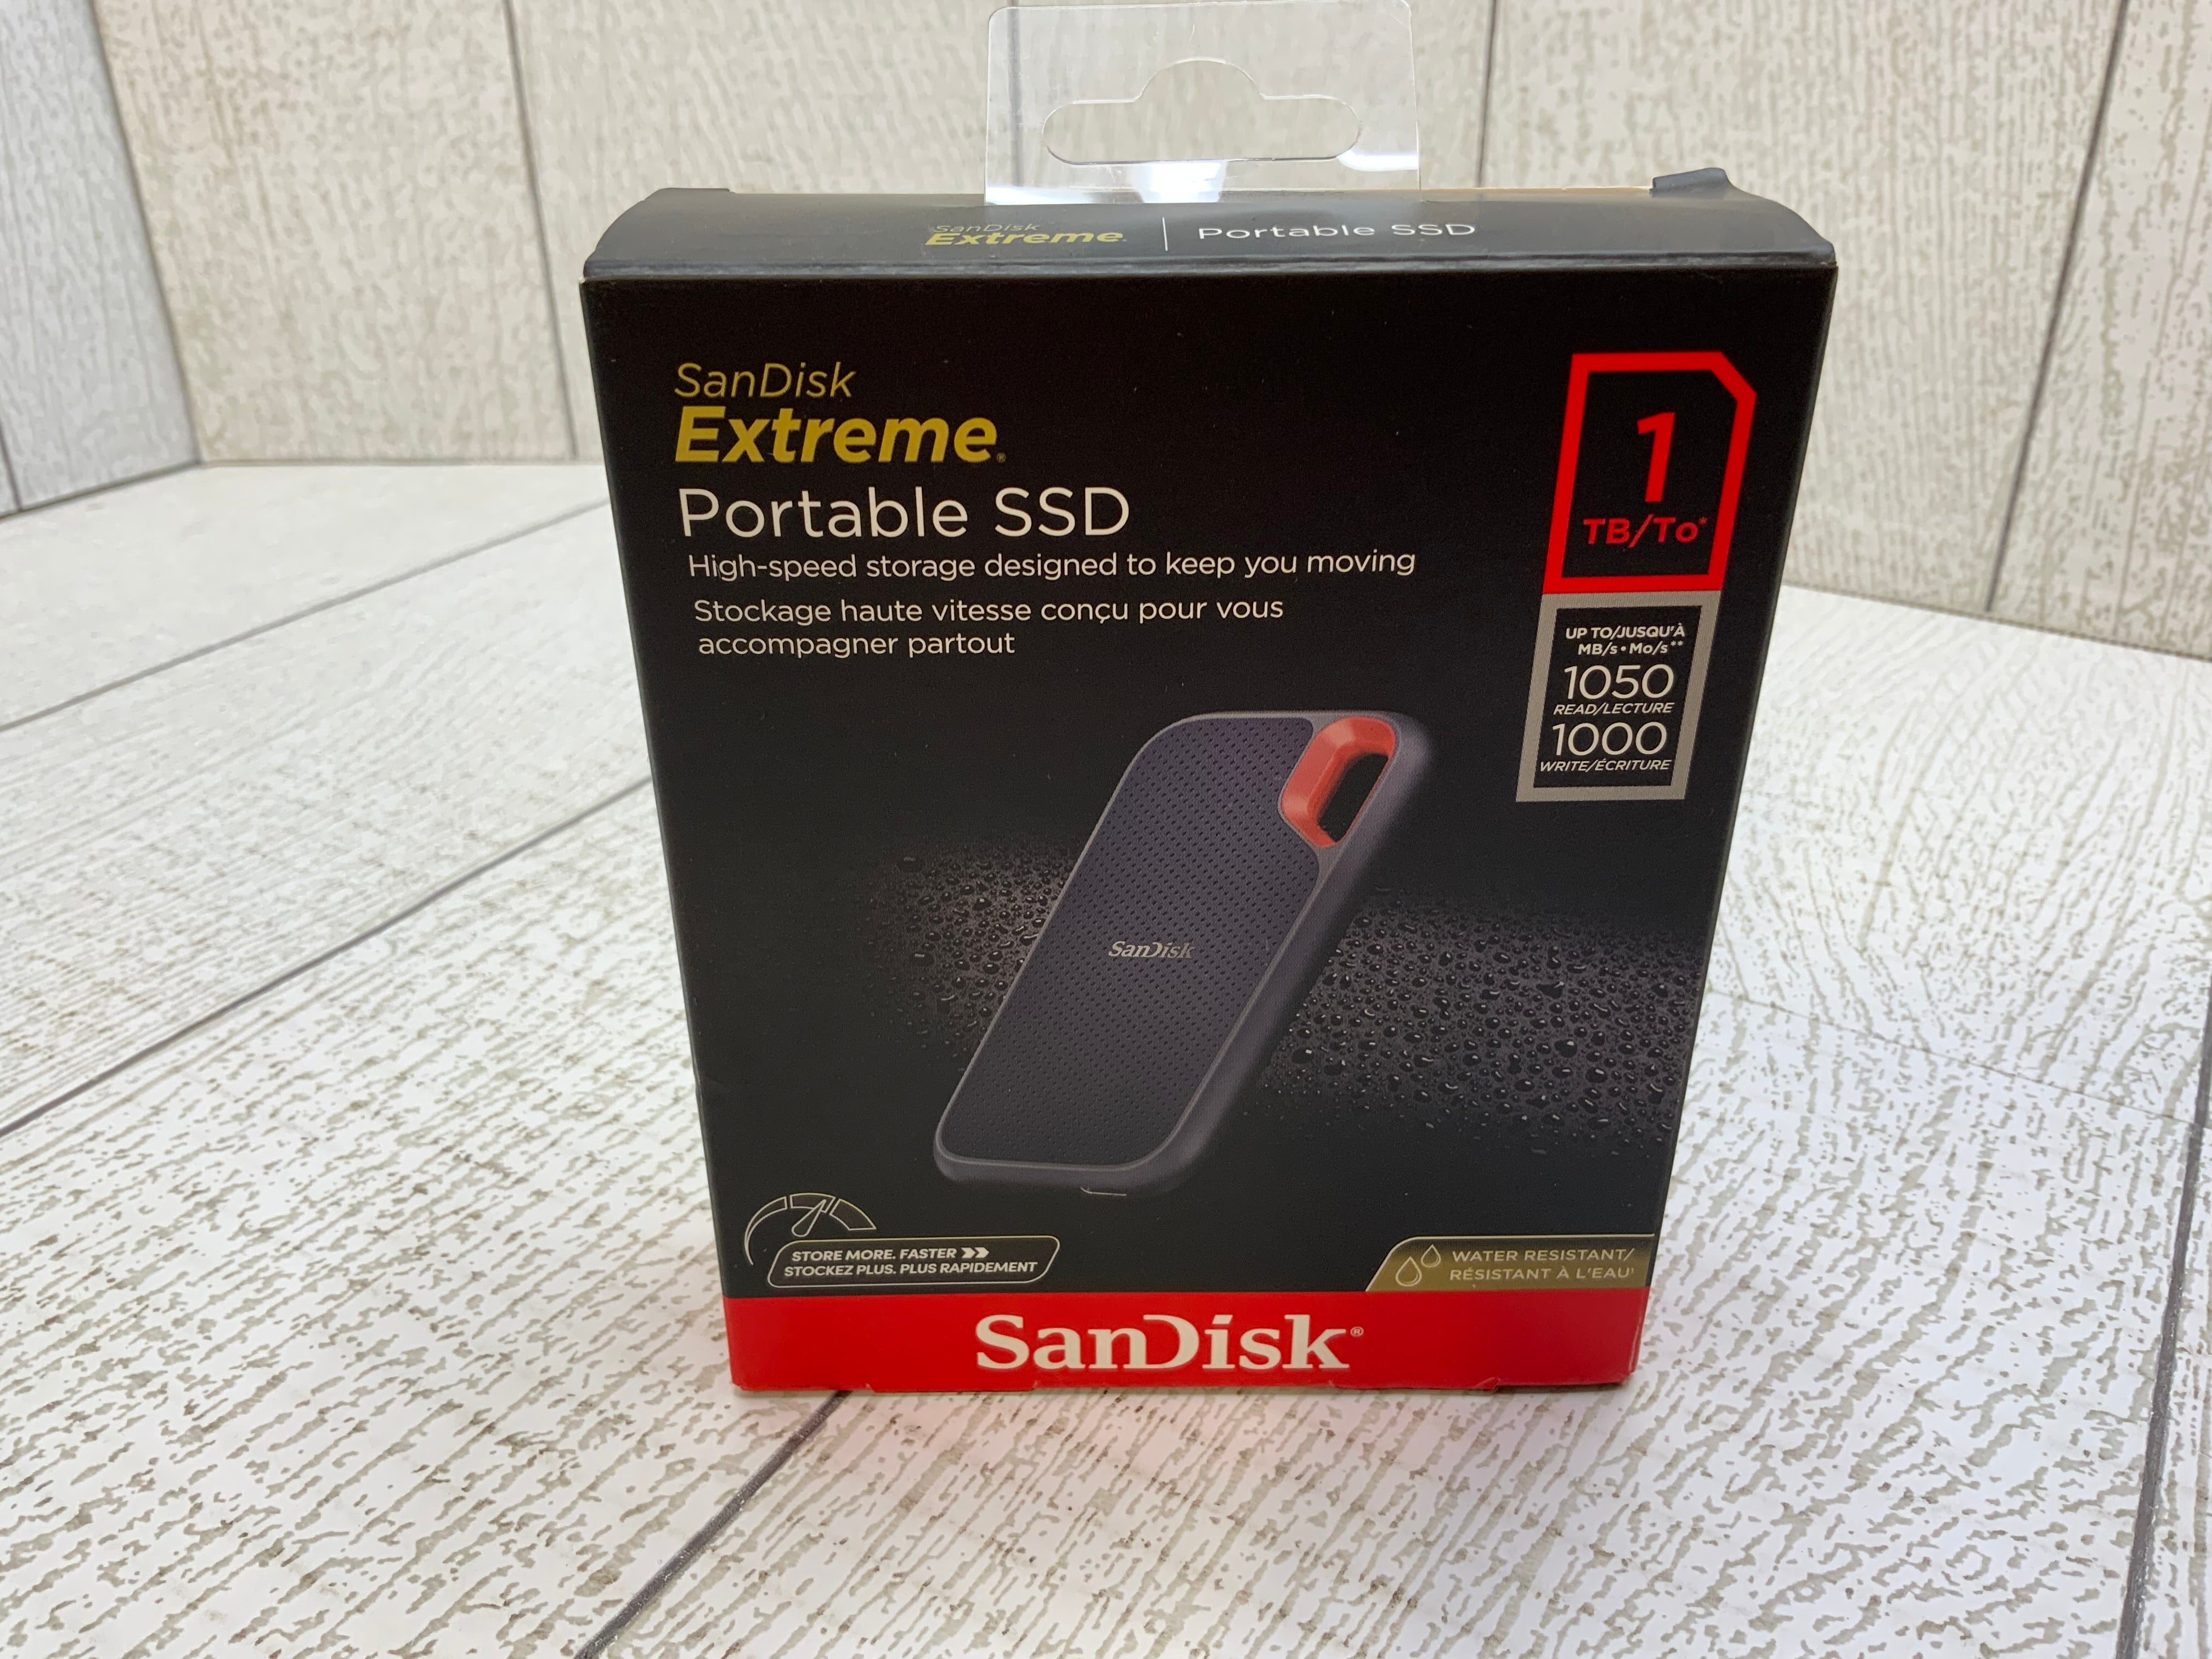 SanDisk 1TB Extreme Portable SSD (7931496825070)